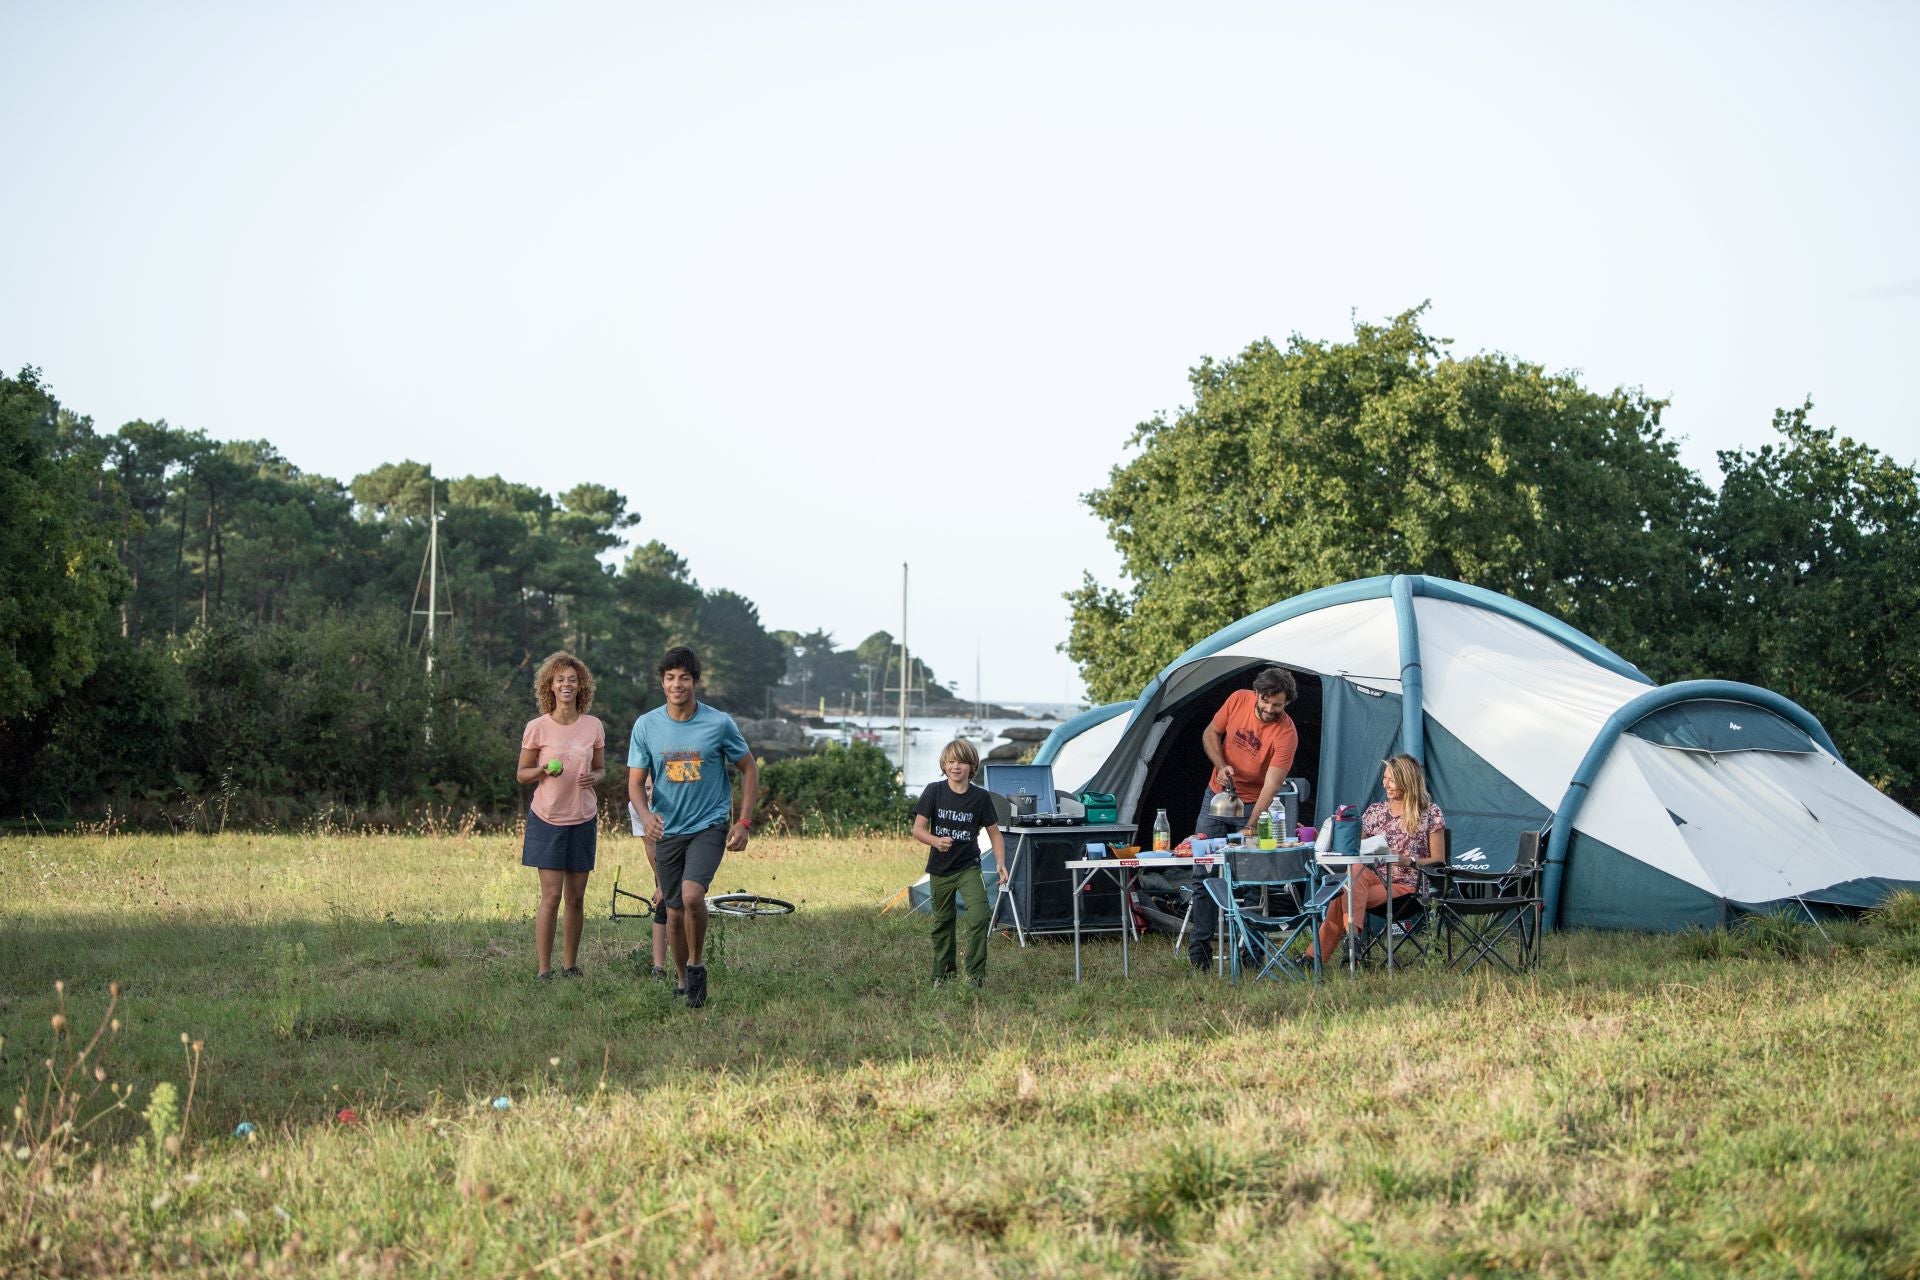 How To Choose The Right Family Camping Tent?